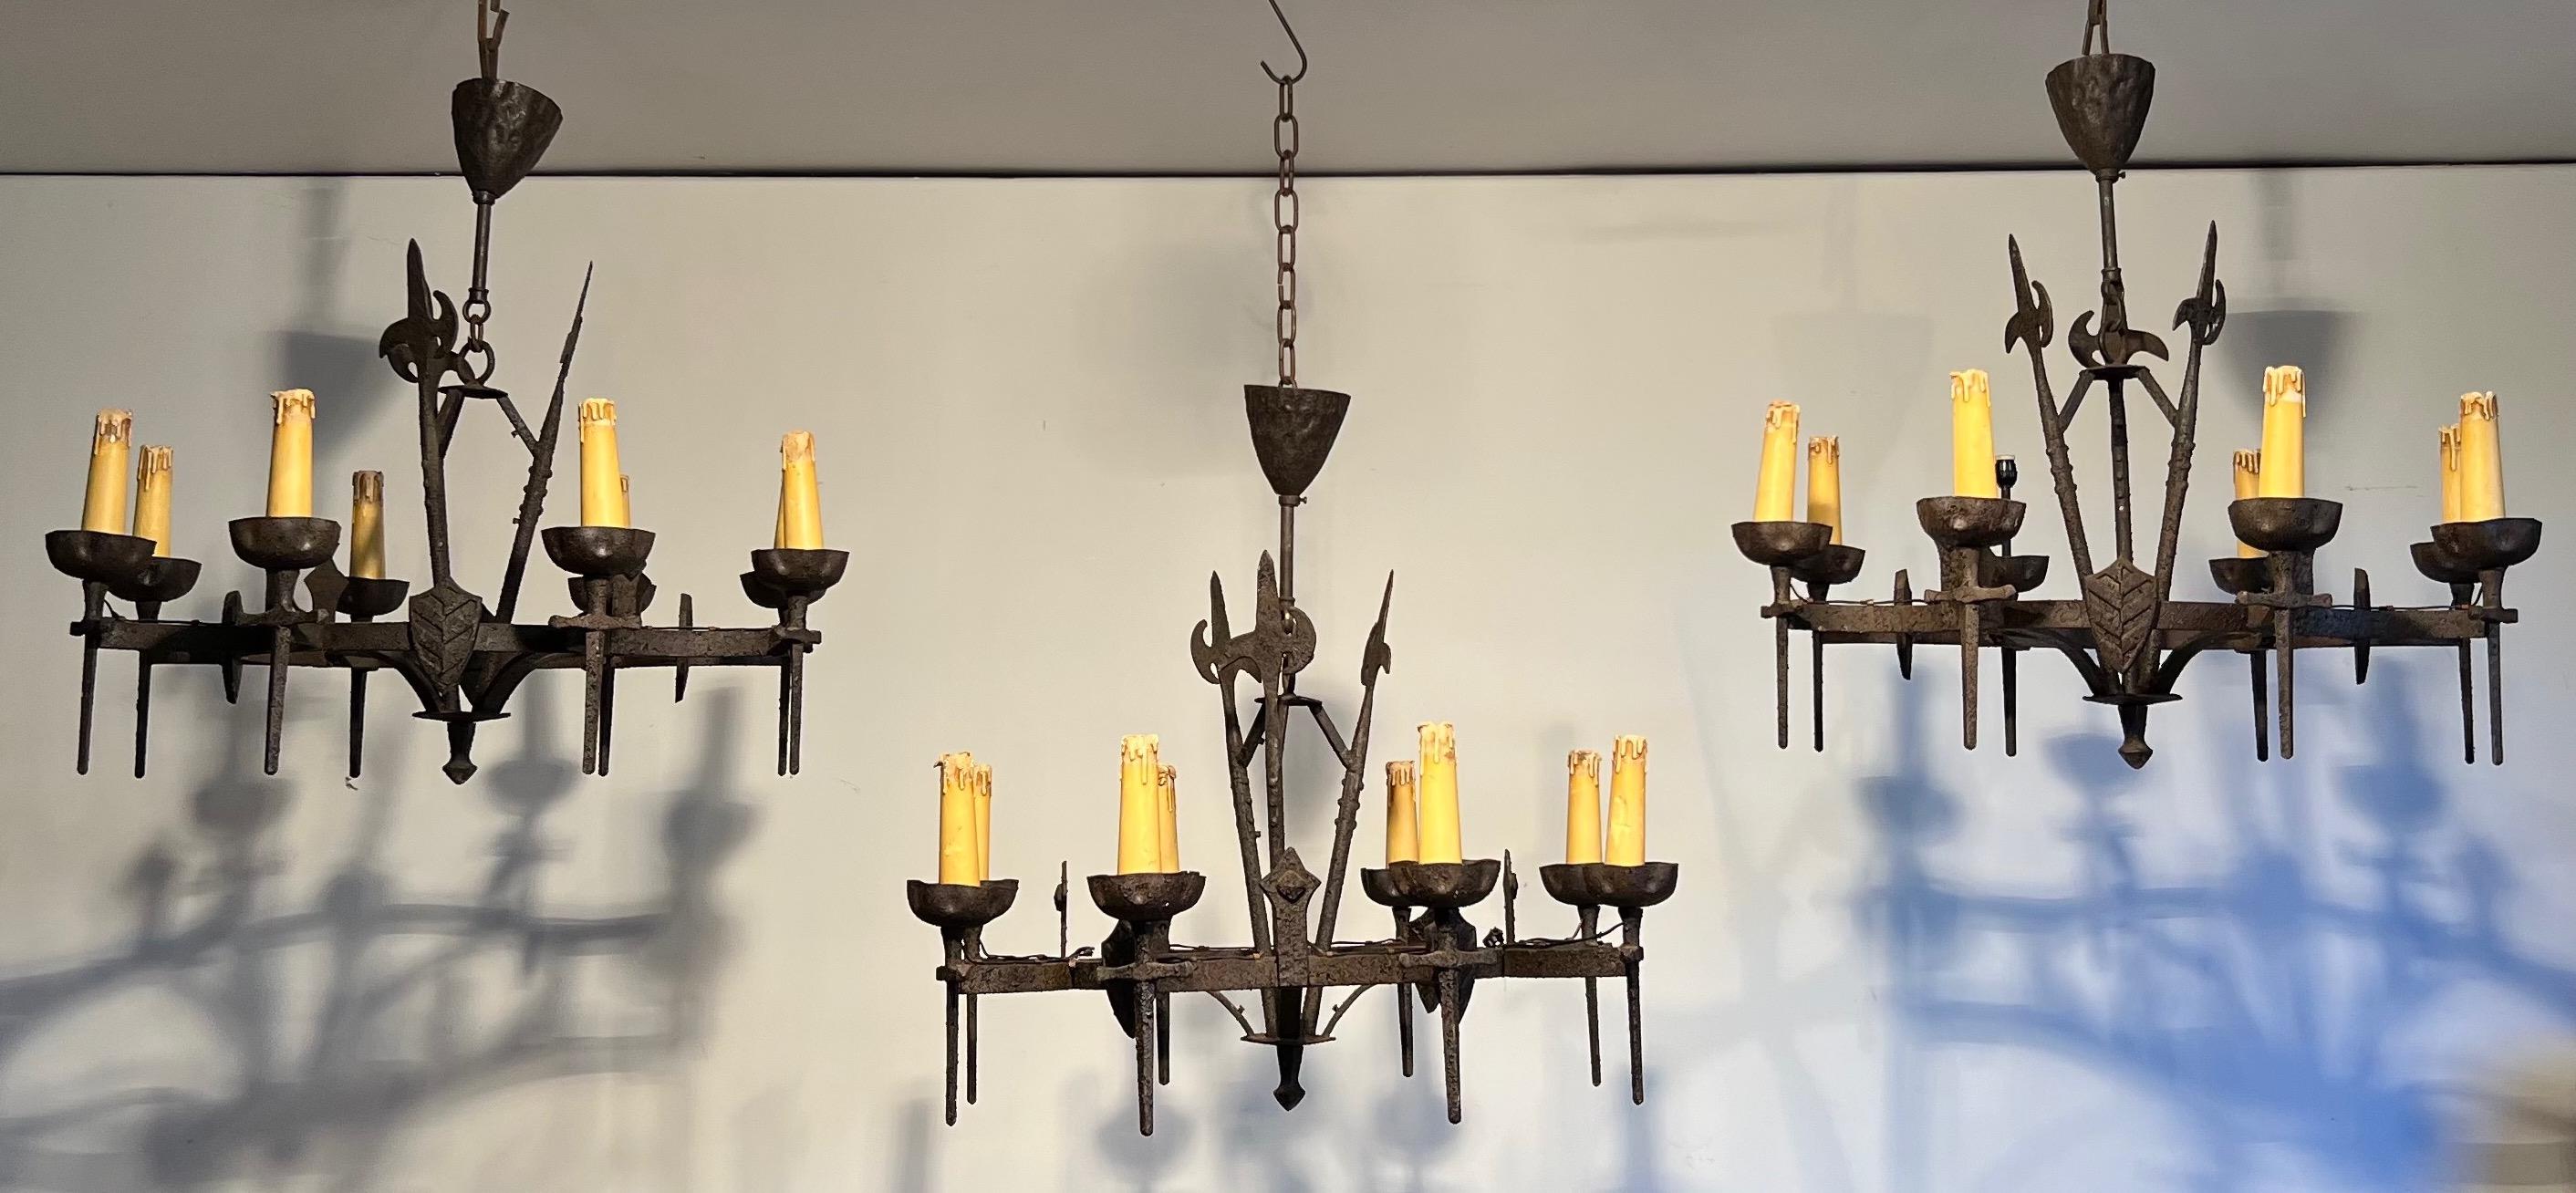 This is a rare set of three chandeliers. These chandeliers are made of wrought iron with 8 arms. They are in the Gothic style. Chandeliers can be sold individually. This is a French work. Circa 1950